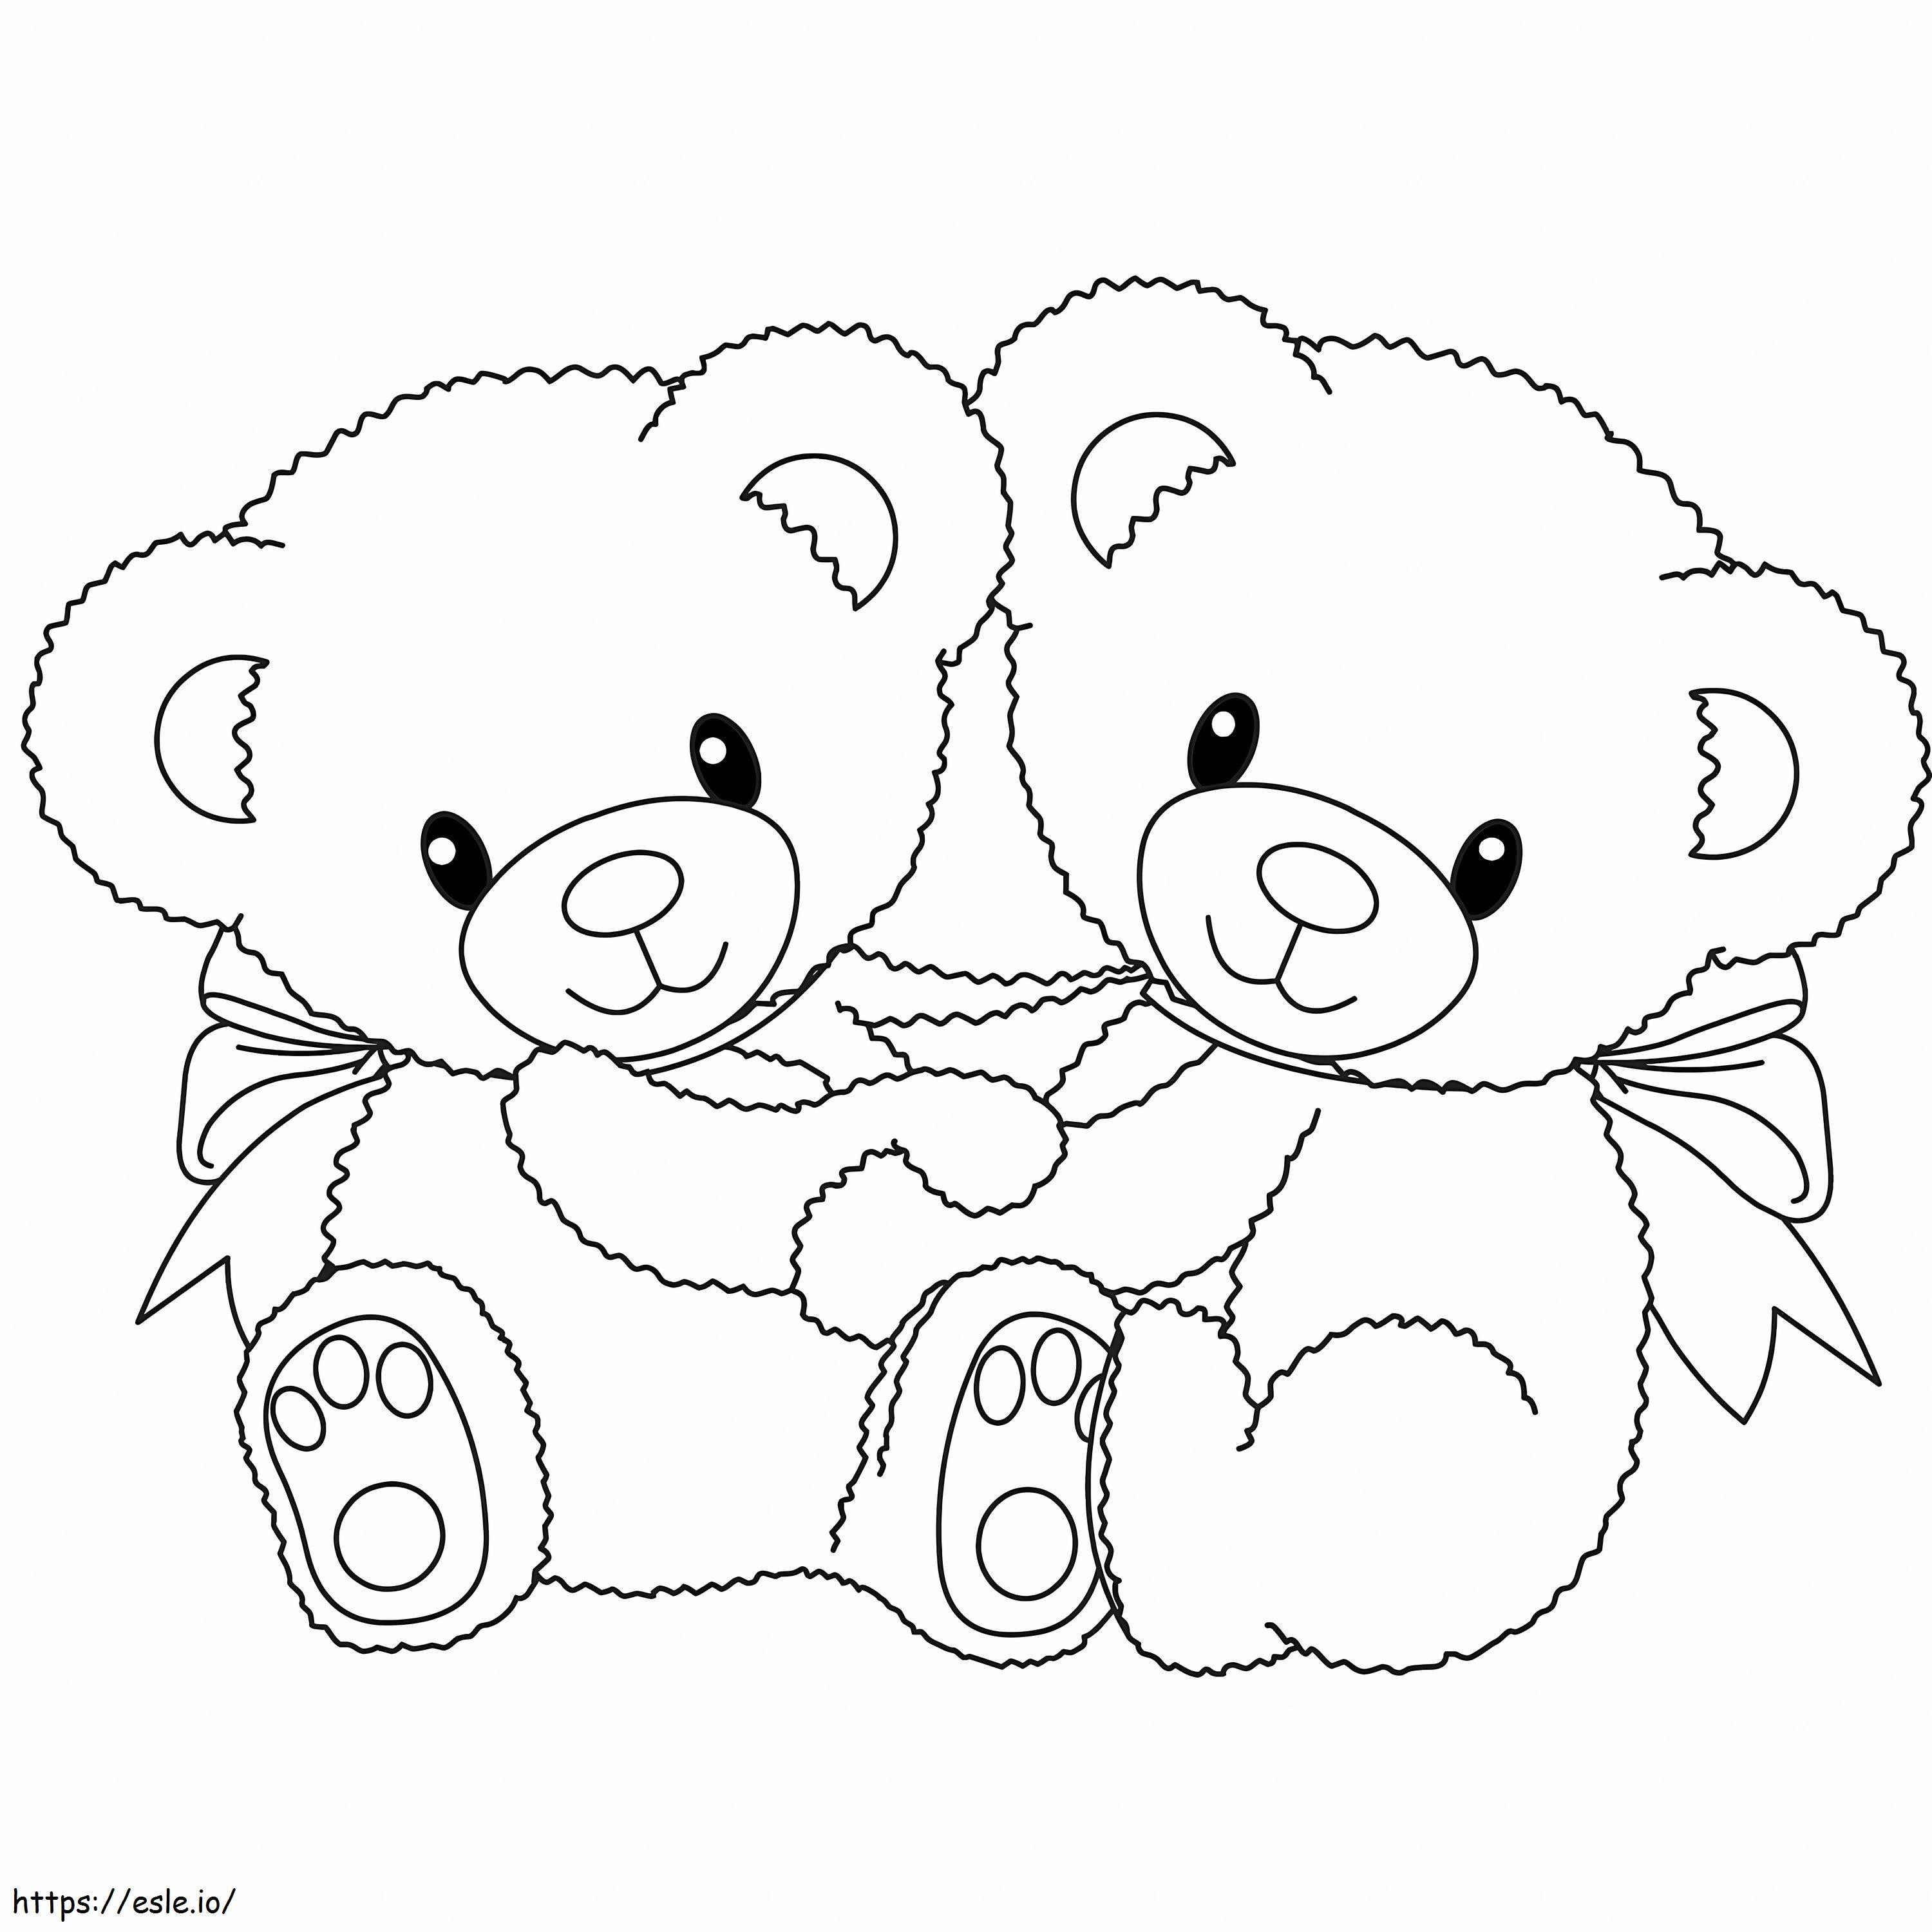 Two Teddy Bears coloring page